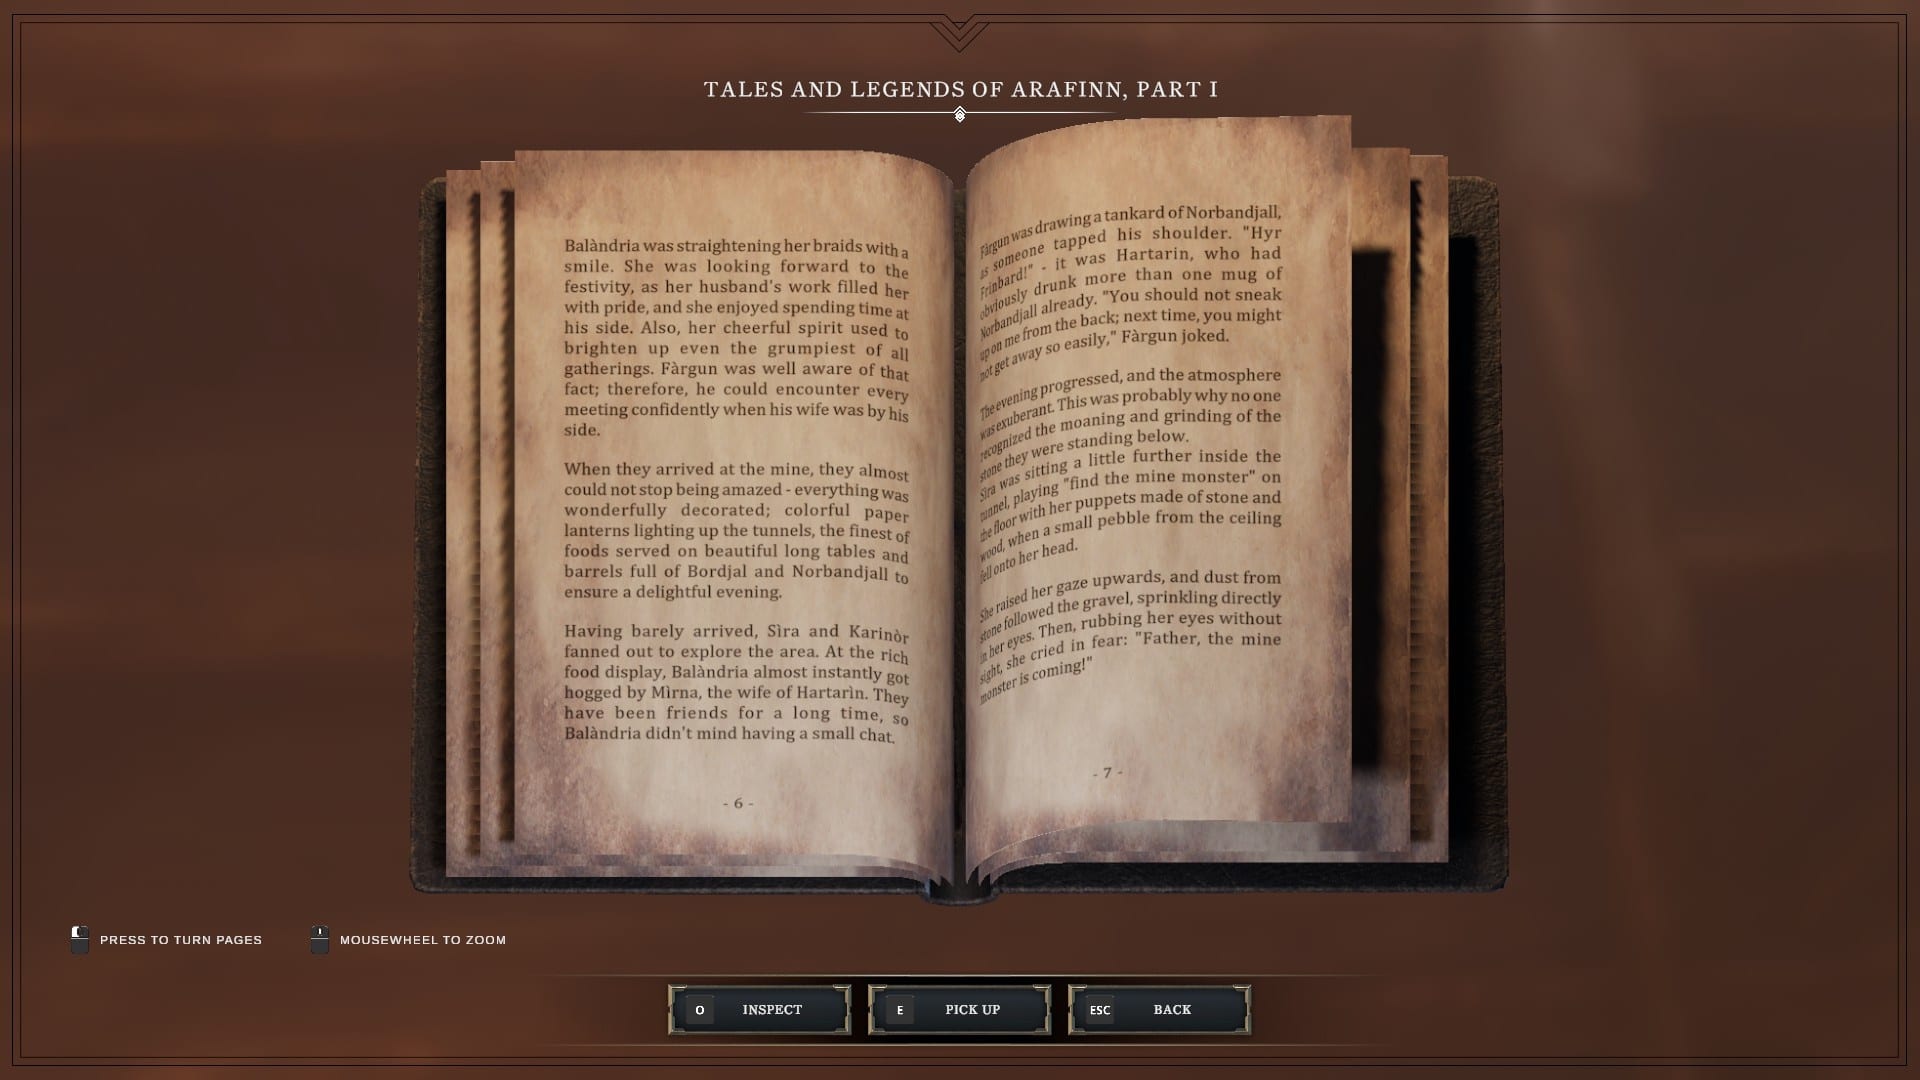 You can really flip through the books, which makes them seem much more atmospheric. Take notes, Bethesda